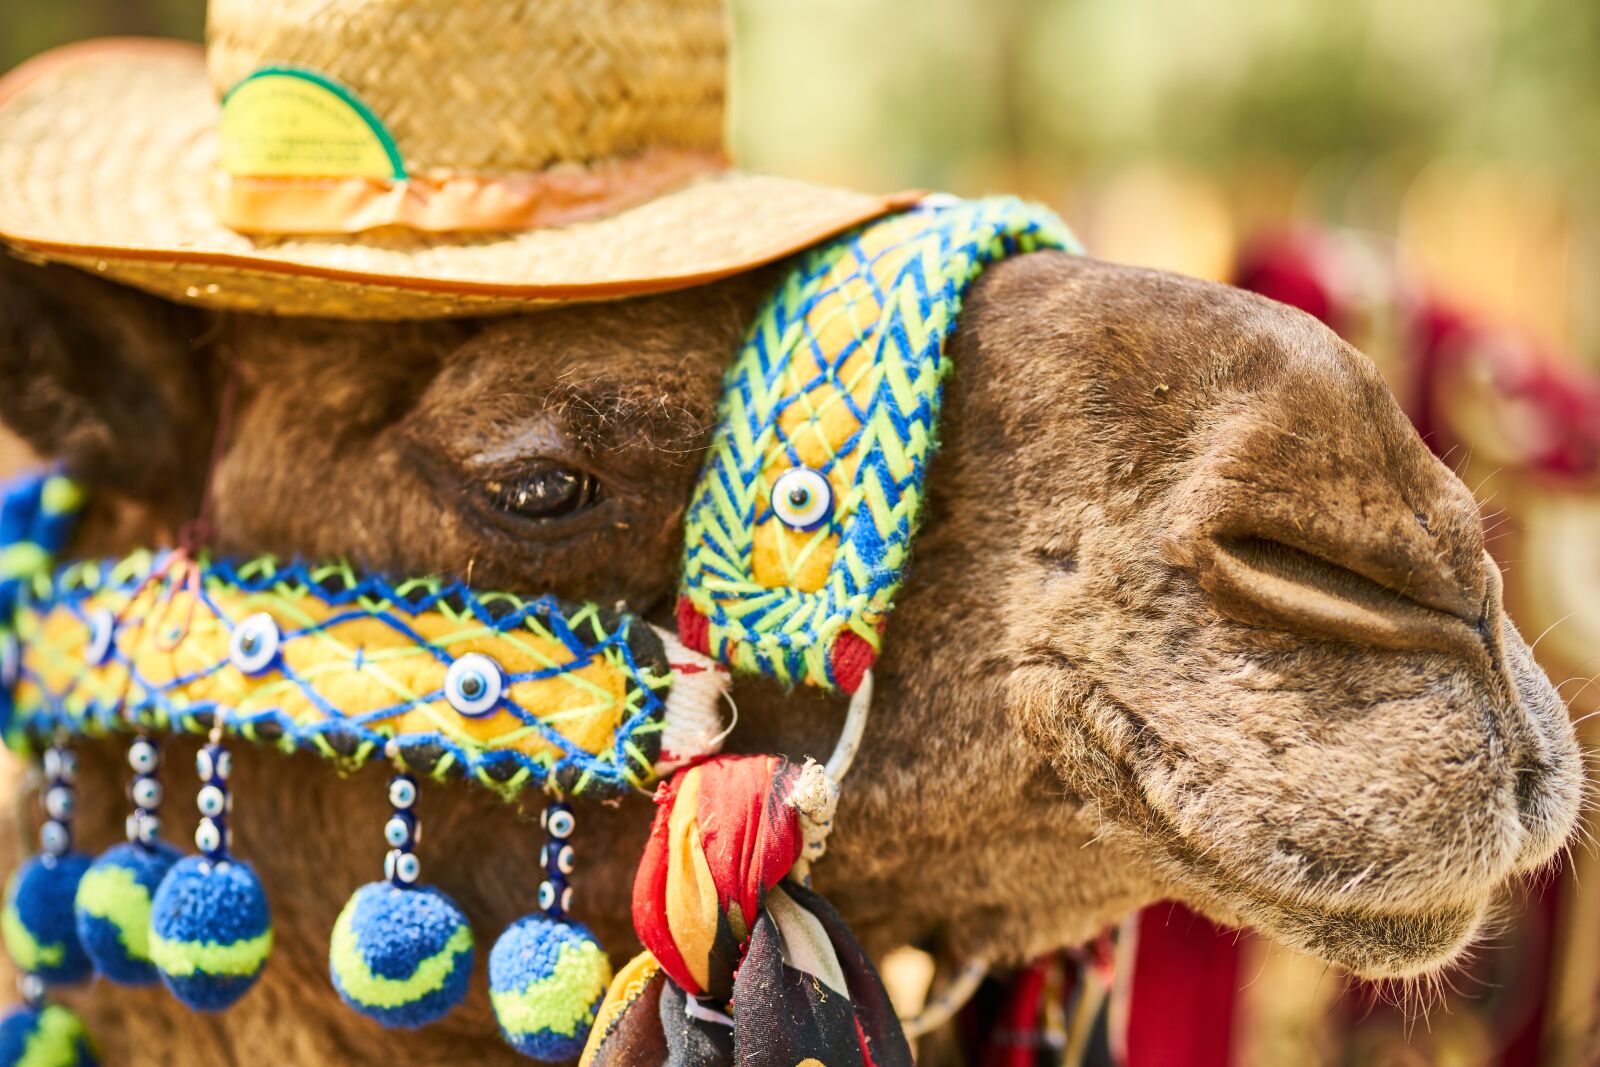 Sony a7R II sample photo. Camel, tourism, hat photography